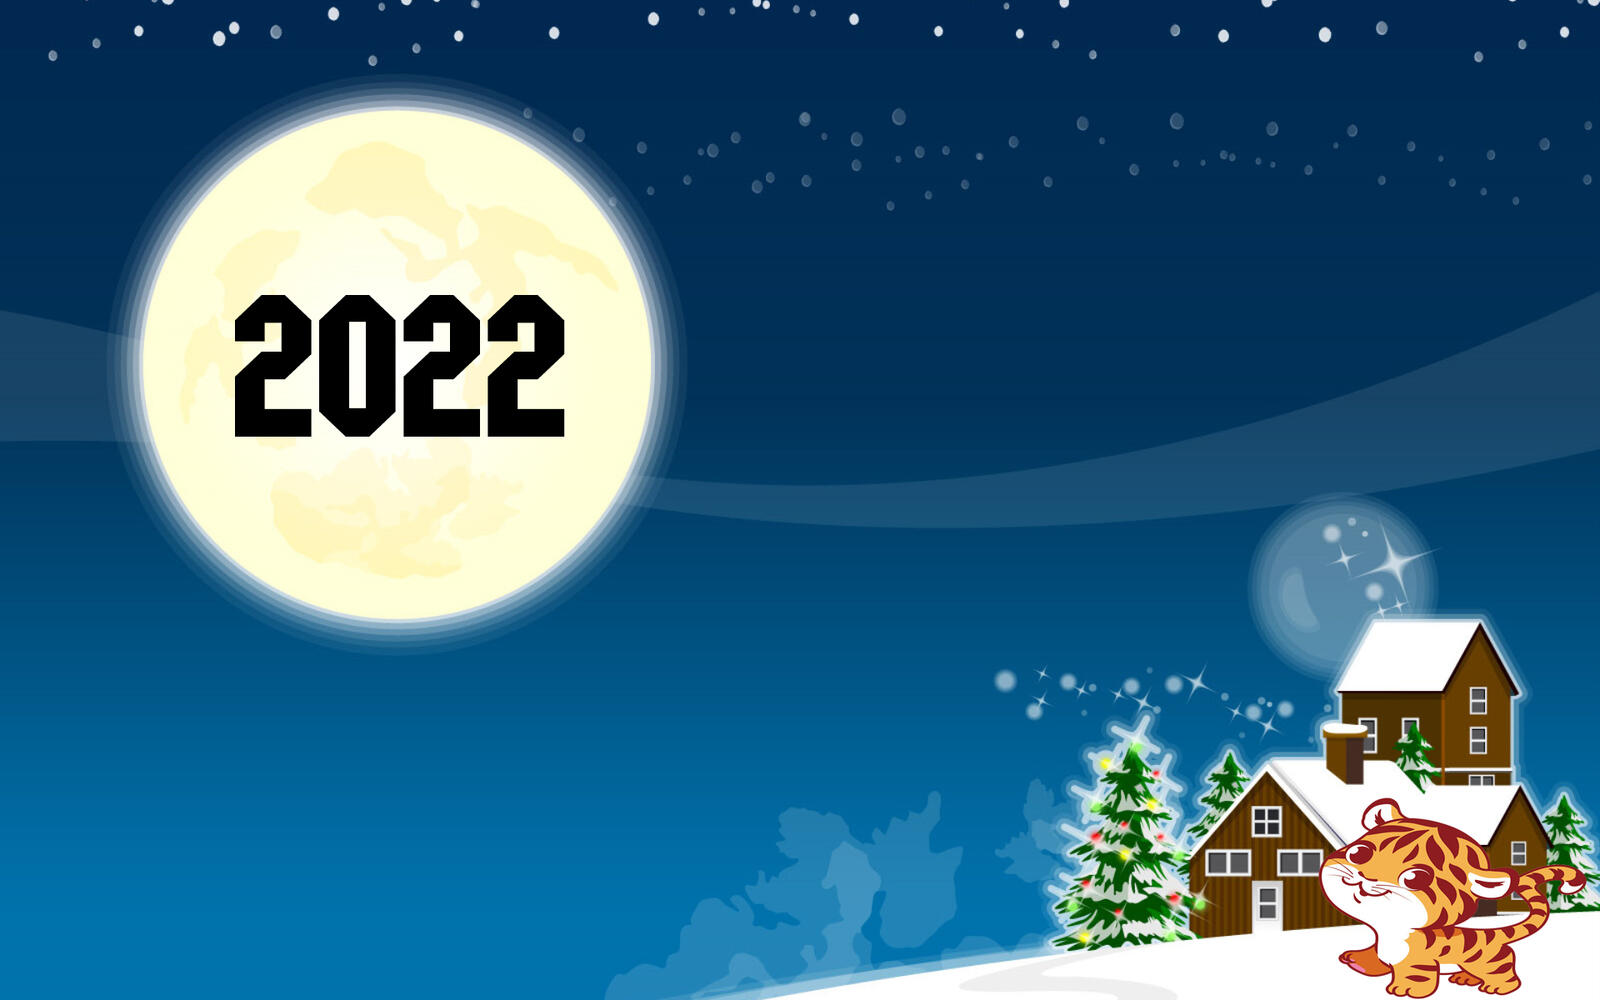 Wallpapers new year 2022 moon on the desktop